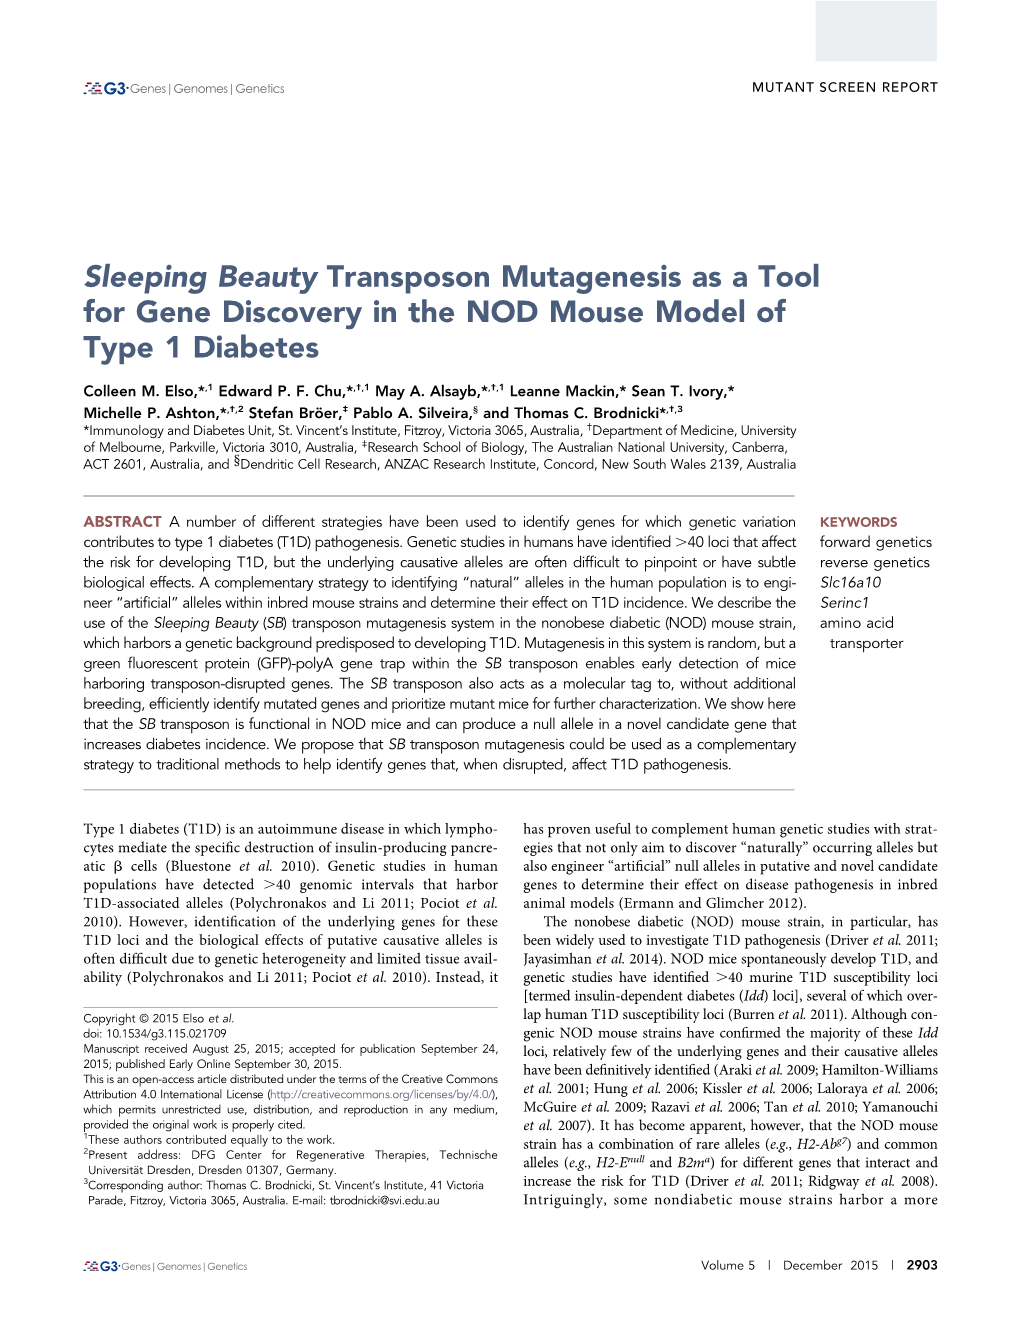 Sleeping Beauty Transposon Mutagenesis As a Tool for Gene Discovery in the NOD Mouse Model of Type 1 Diabetes